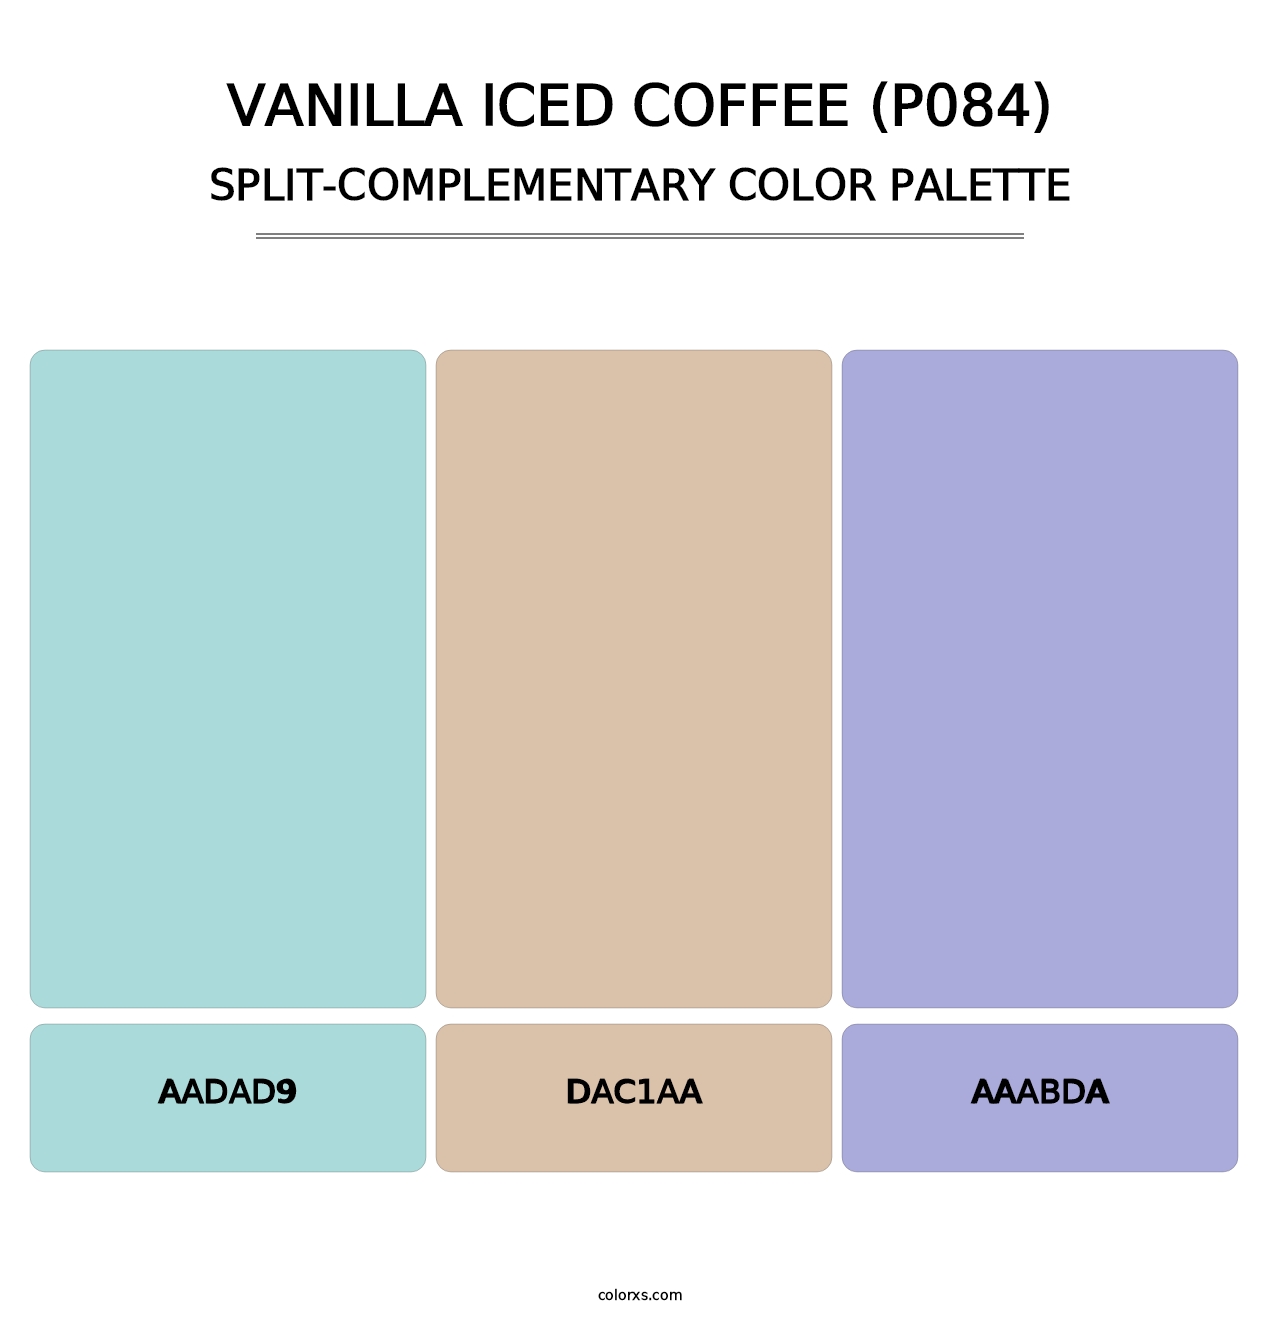 Vanilla Iced Coffee (P084) - Split-Complementary Color Palette